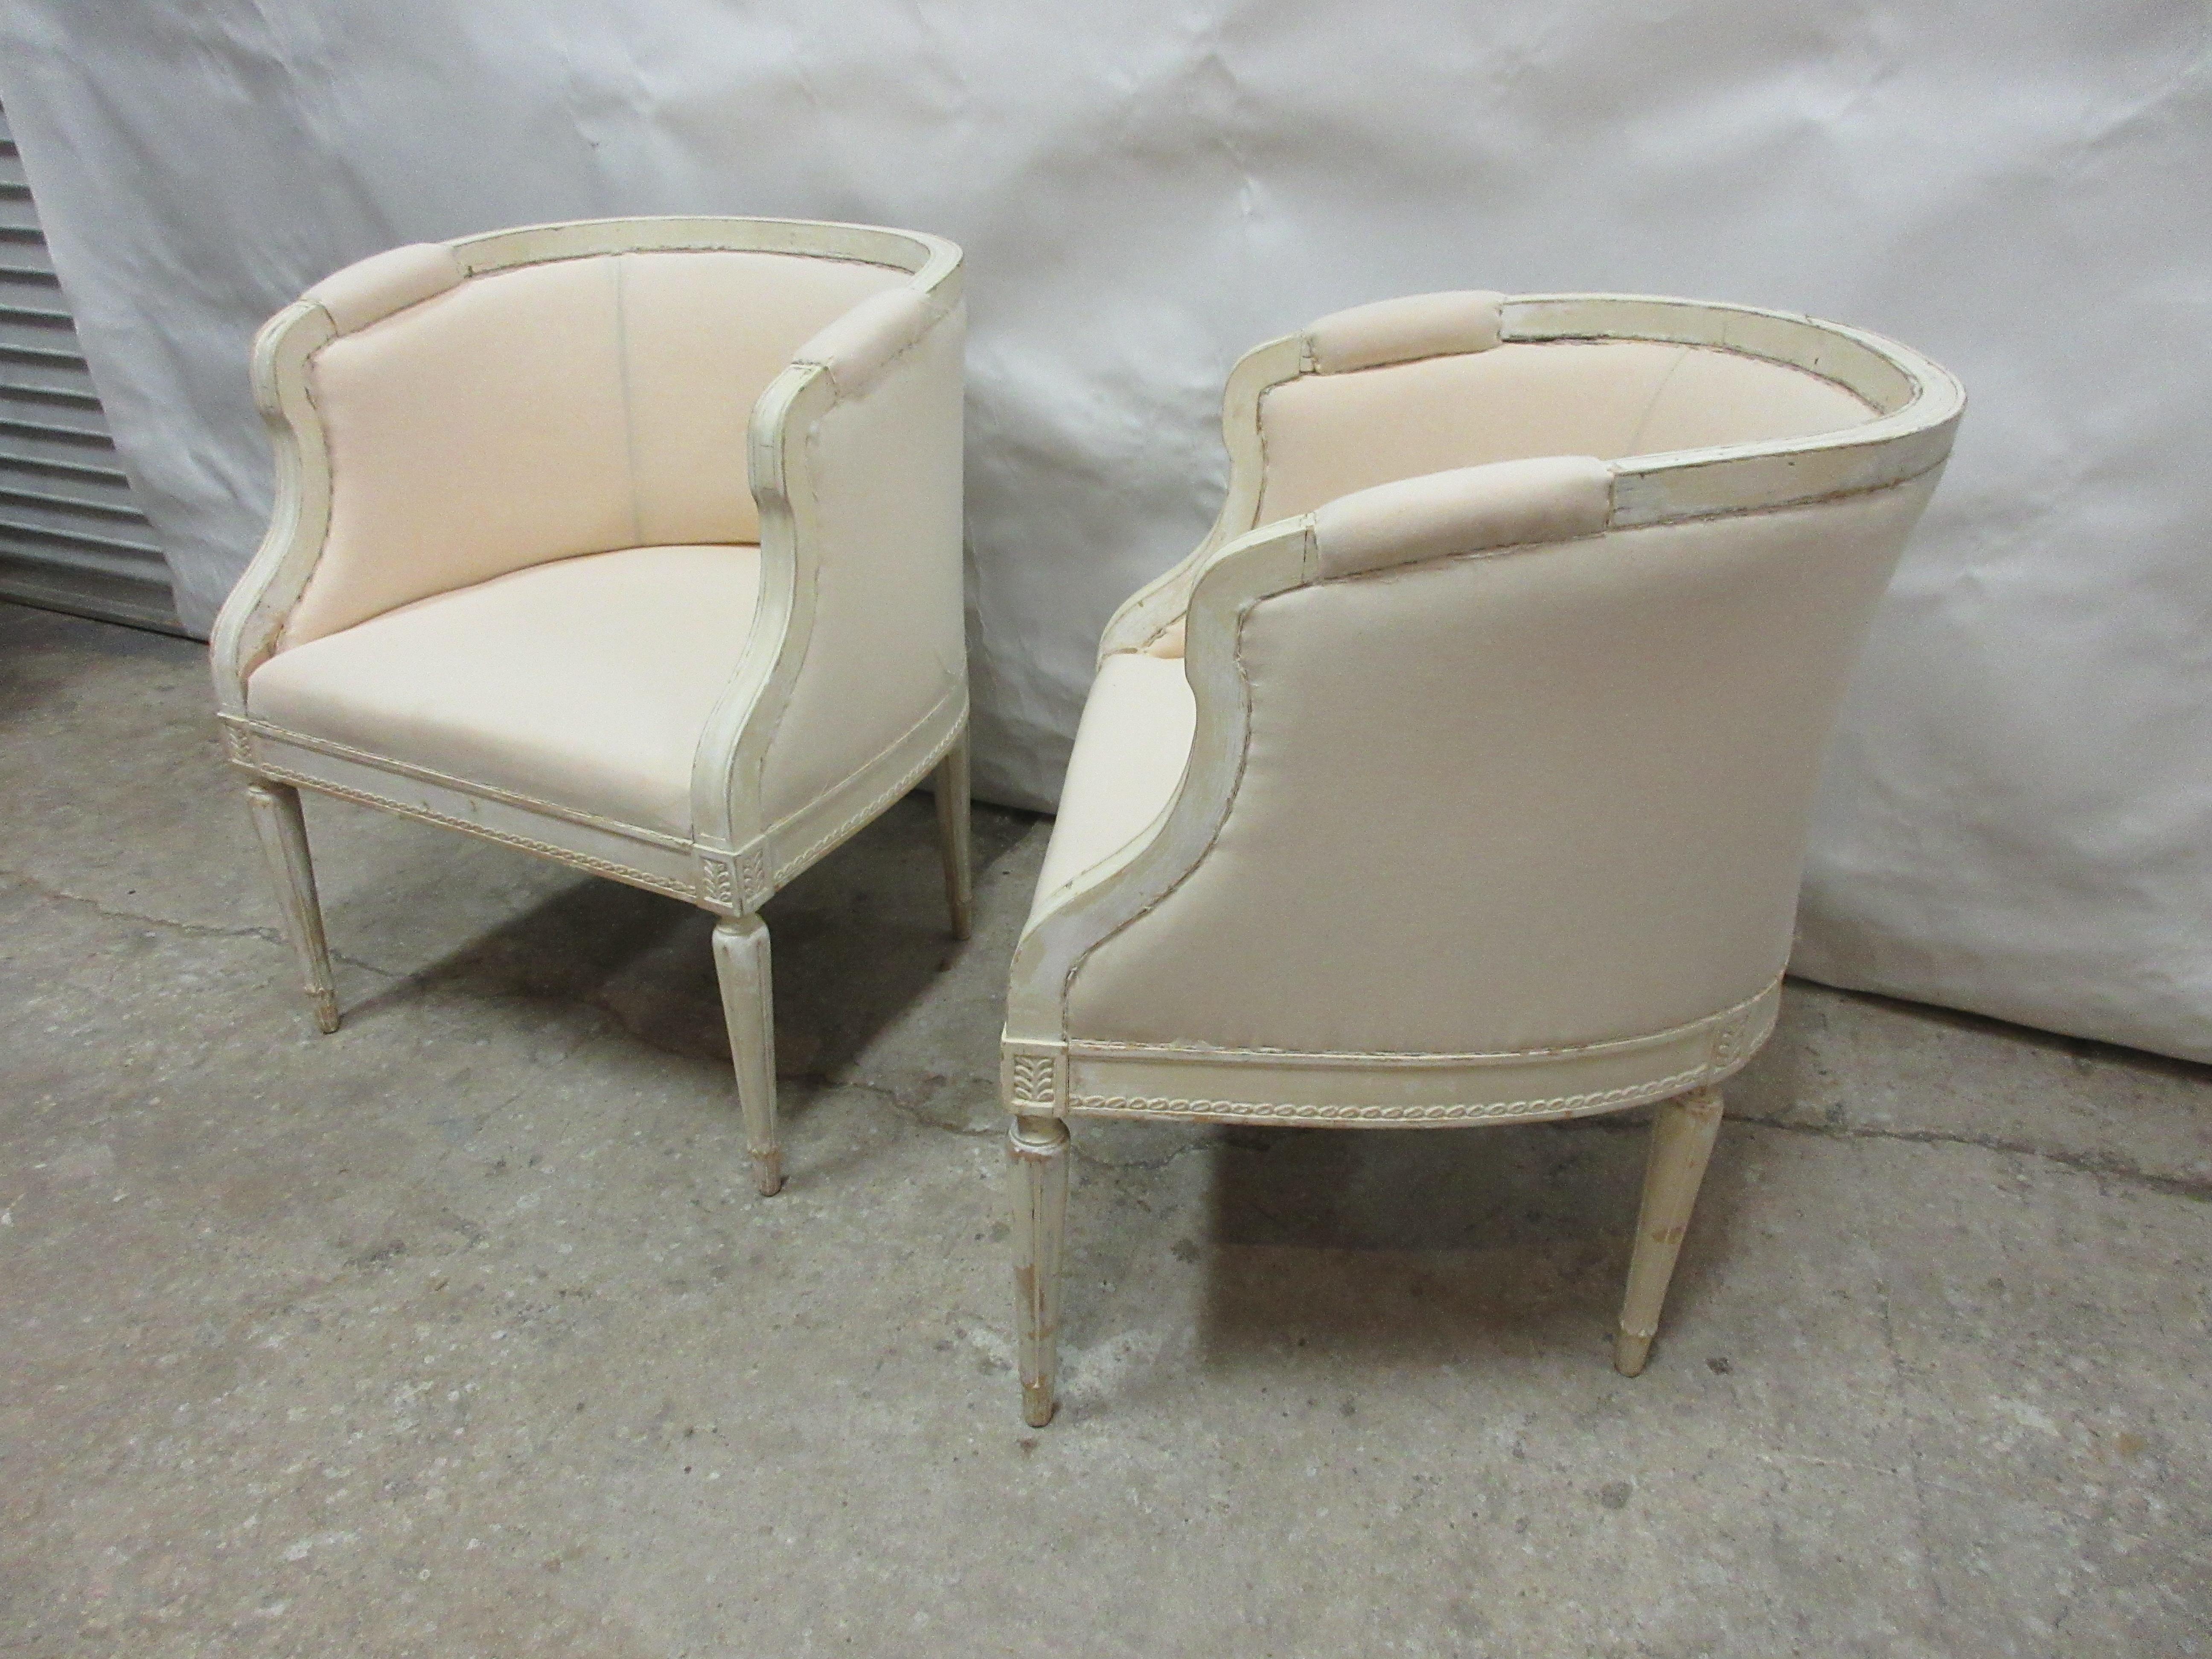 This is an unusual set of 2 Swedish Barrel Chairs 100% Original paint, they have been restored and New seating installed. seating covered in Muslin.